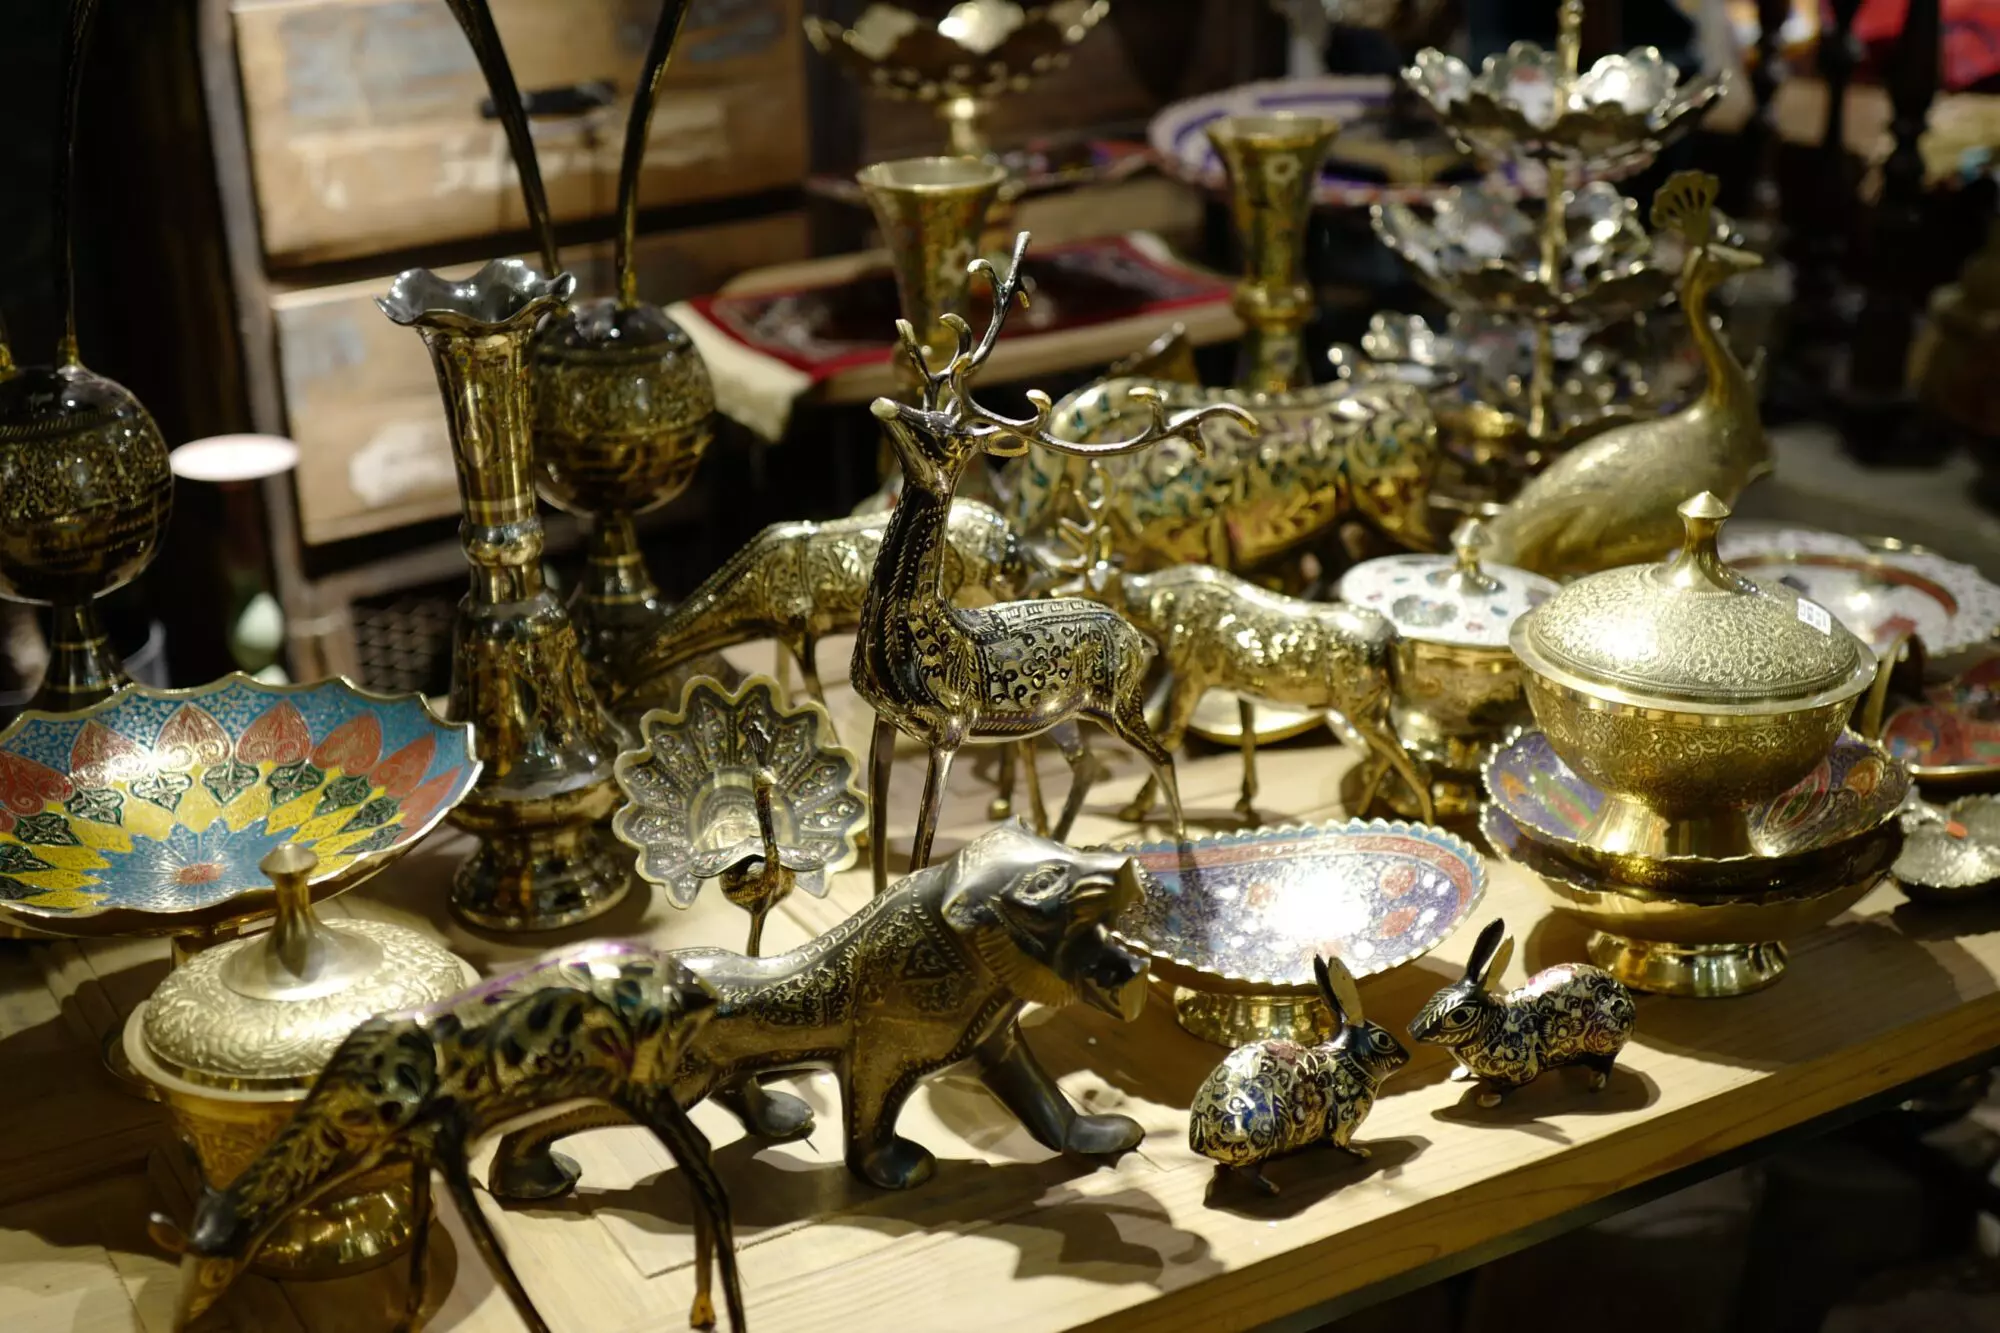 Sell Antiques Near Me | Antique Dealers Who Buy Antiques